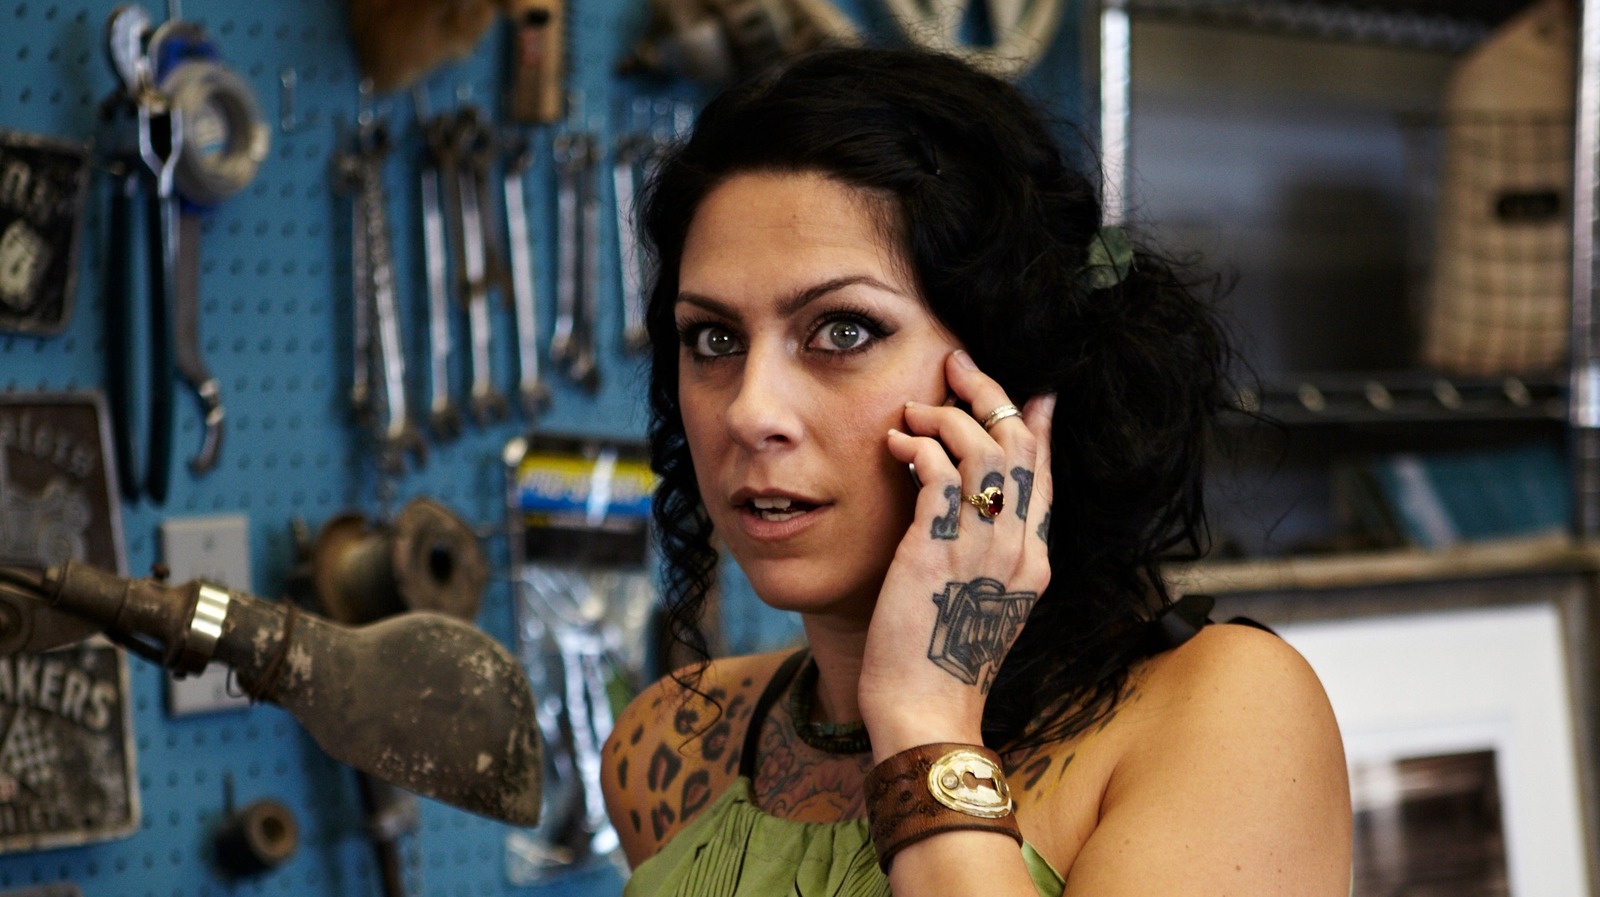 denise aloi recommends Pictures Of Danielle Colby